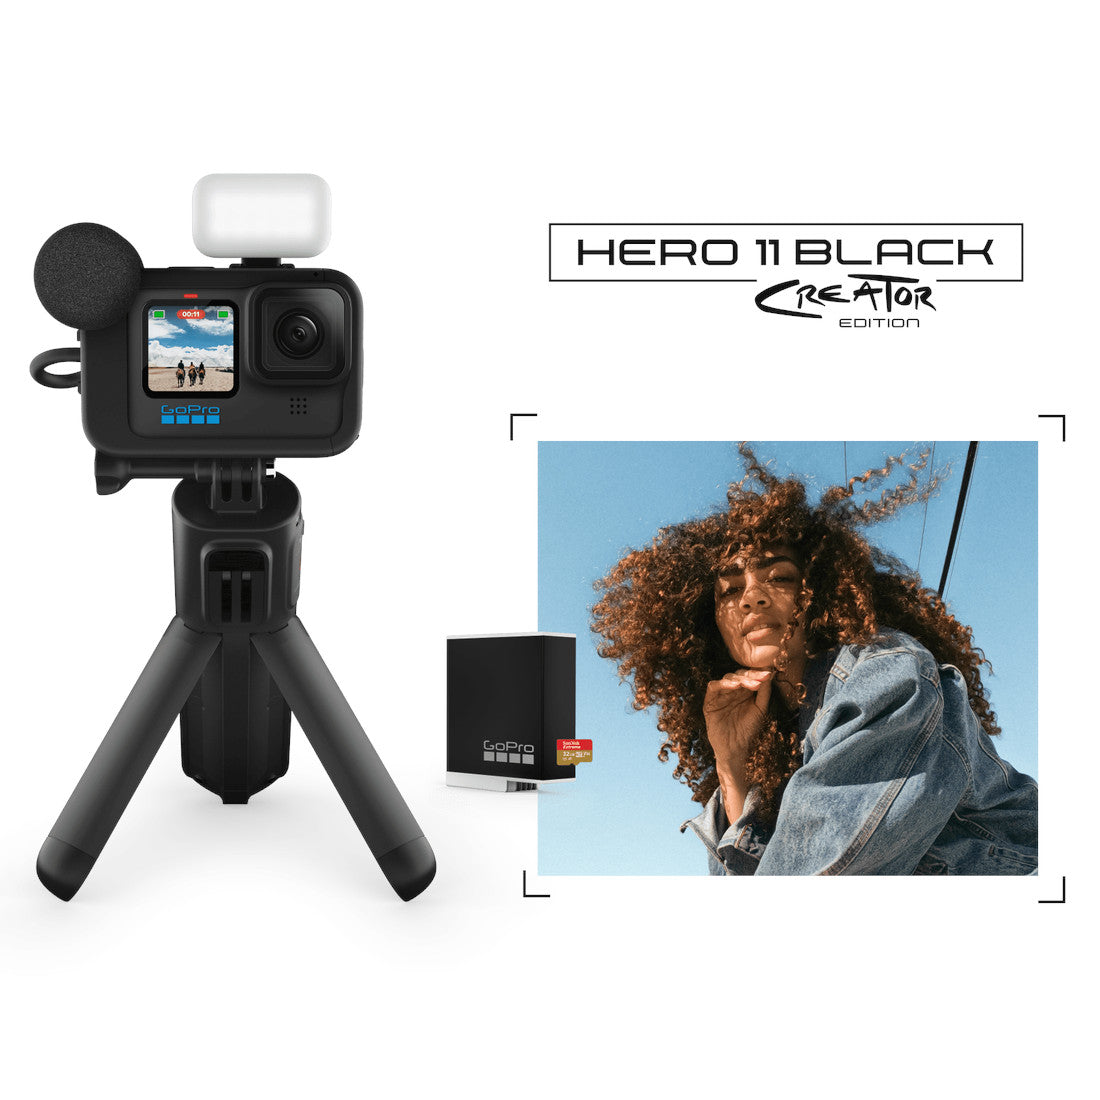 Gopro Hero11 Black Camera Creator Edition - All in One Content Capturing Set